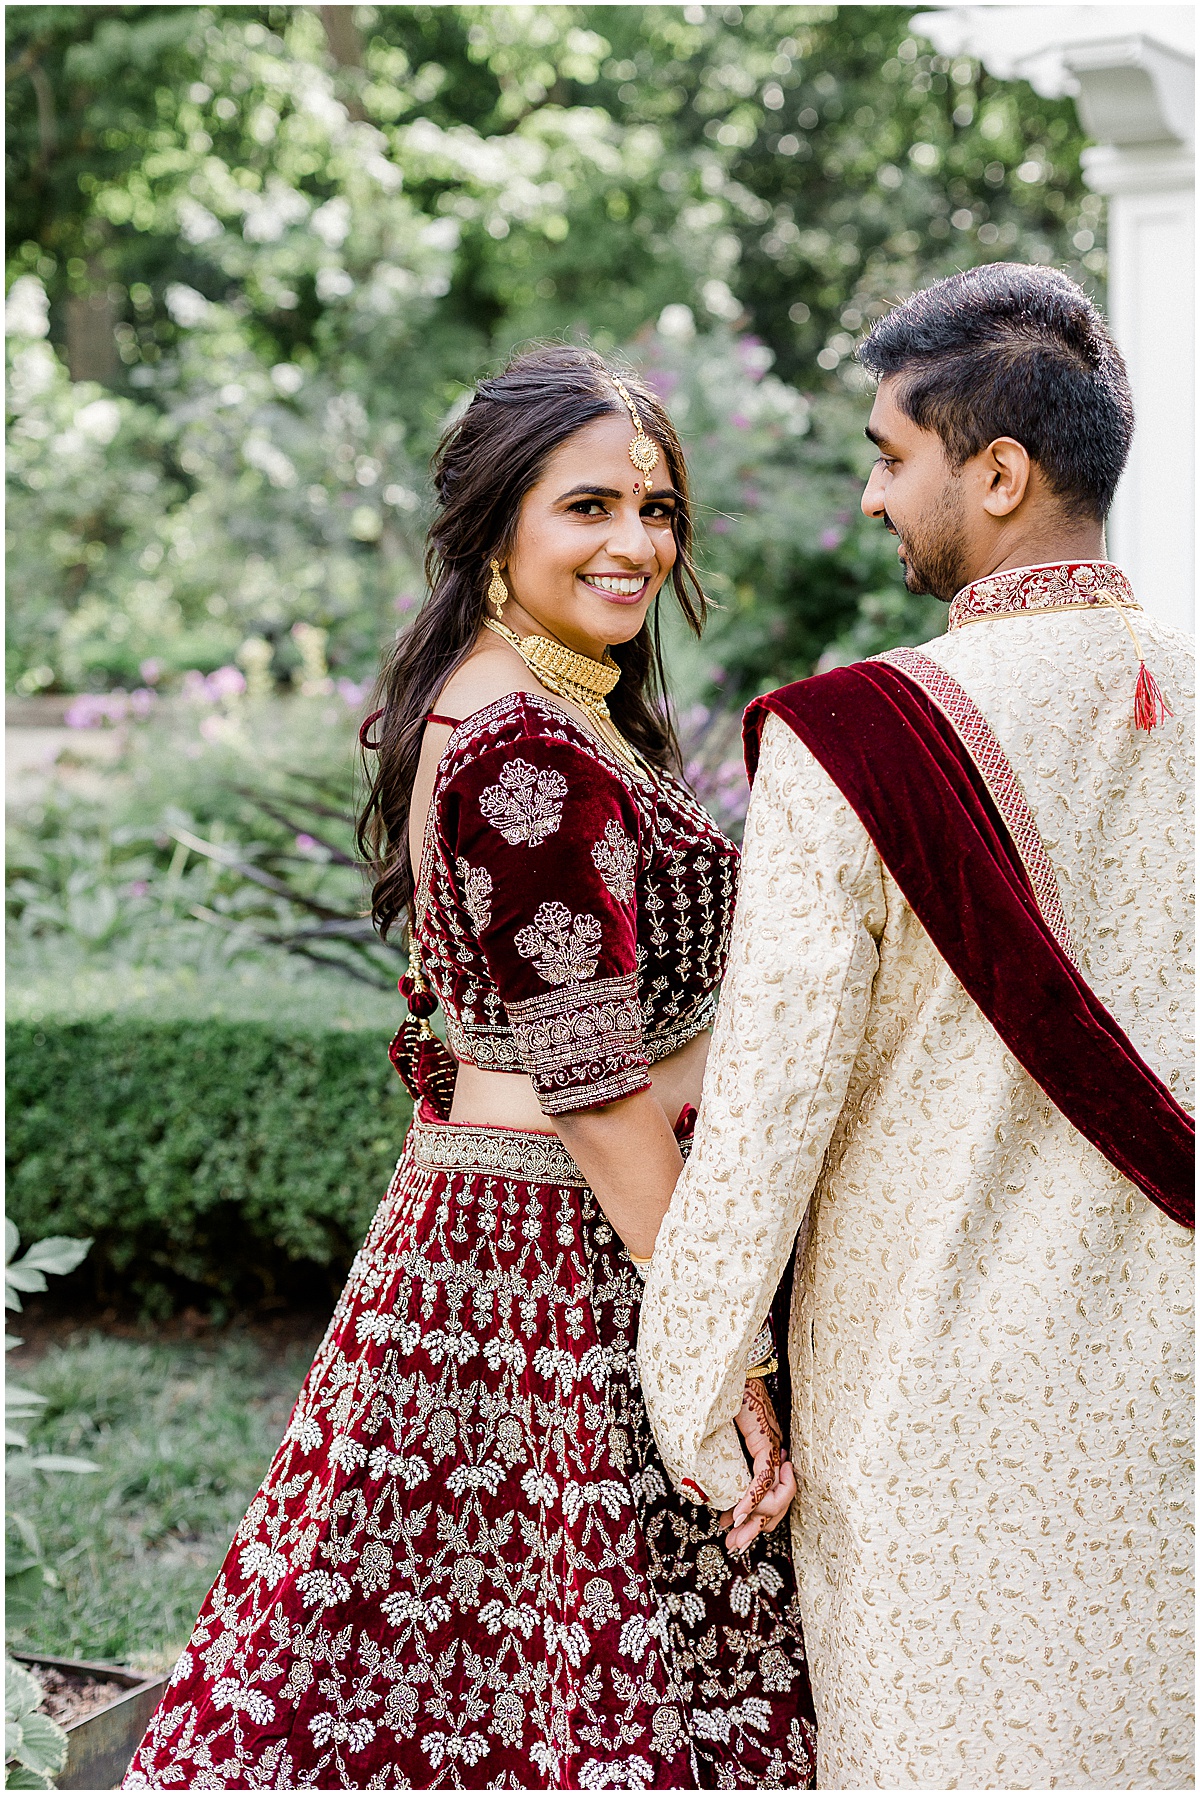 Newfields Indianapolis Wedding captured by the Kaitlin Mendoza Photography associate team in Indianapolis, IN.